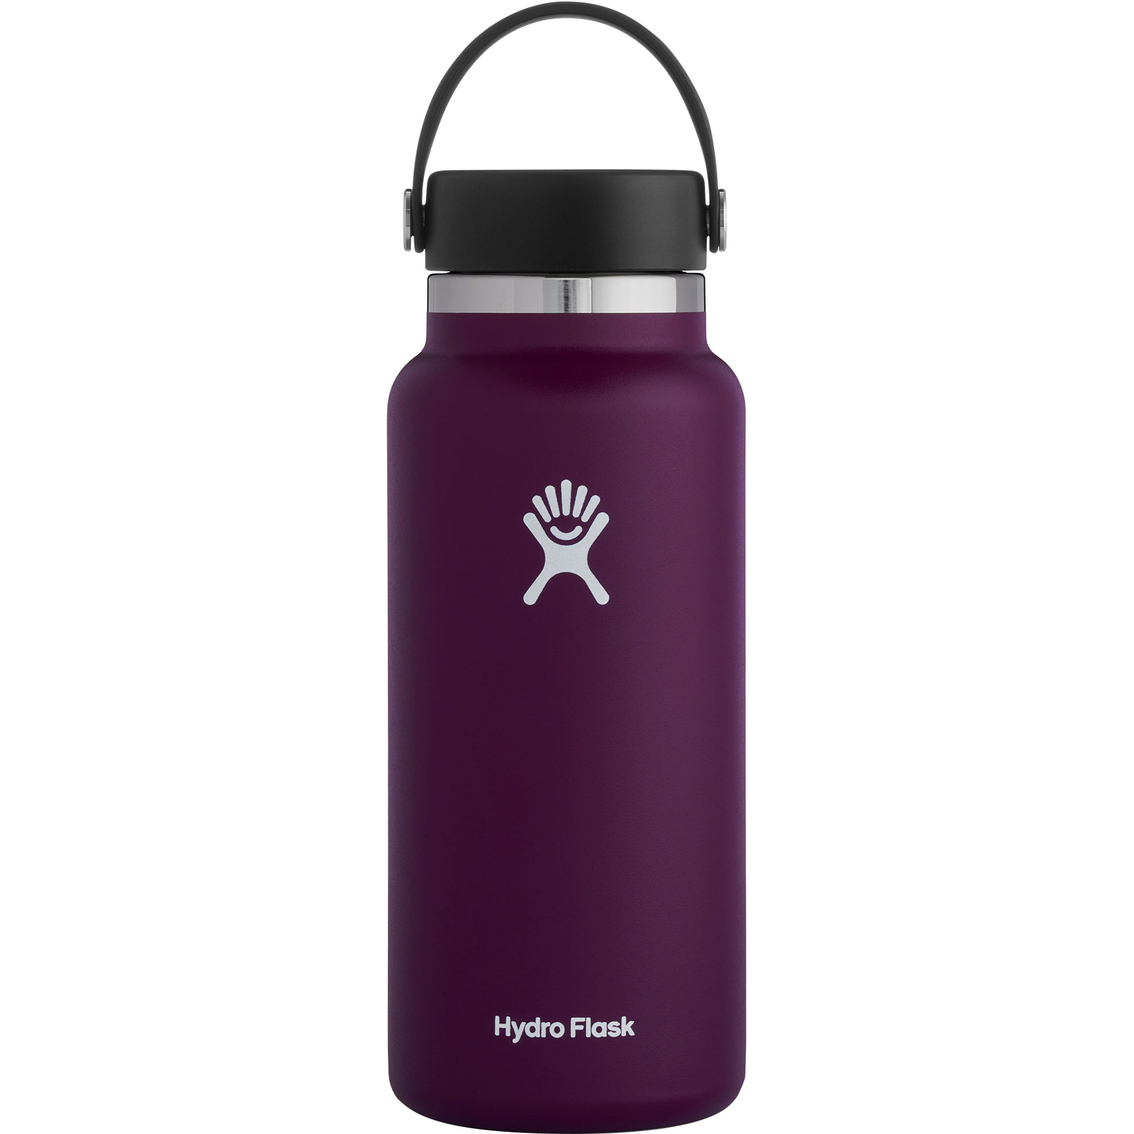 Hydro Flask Flask 6 oz Mug 177ml Thermo Cup - Water Bottles - Fitness  Accessory - Fitness - All